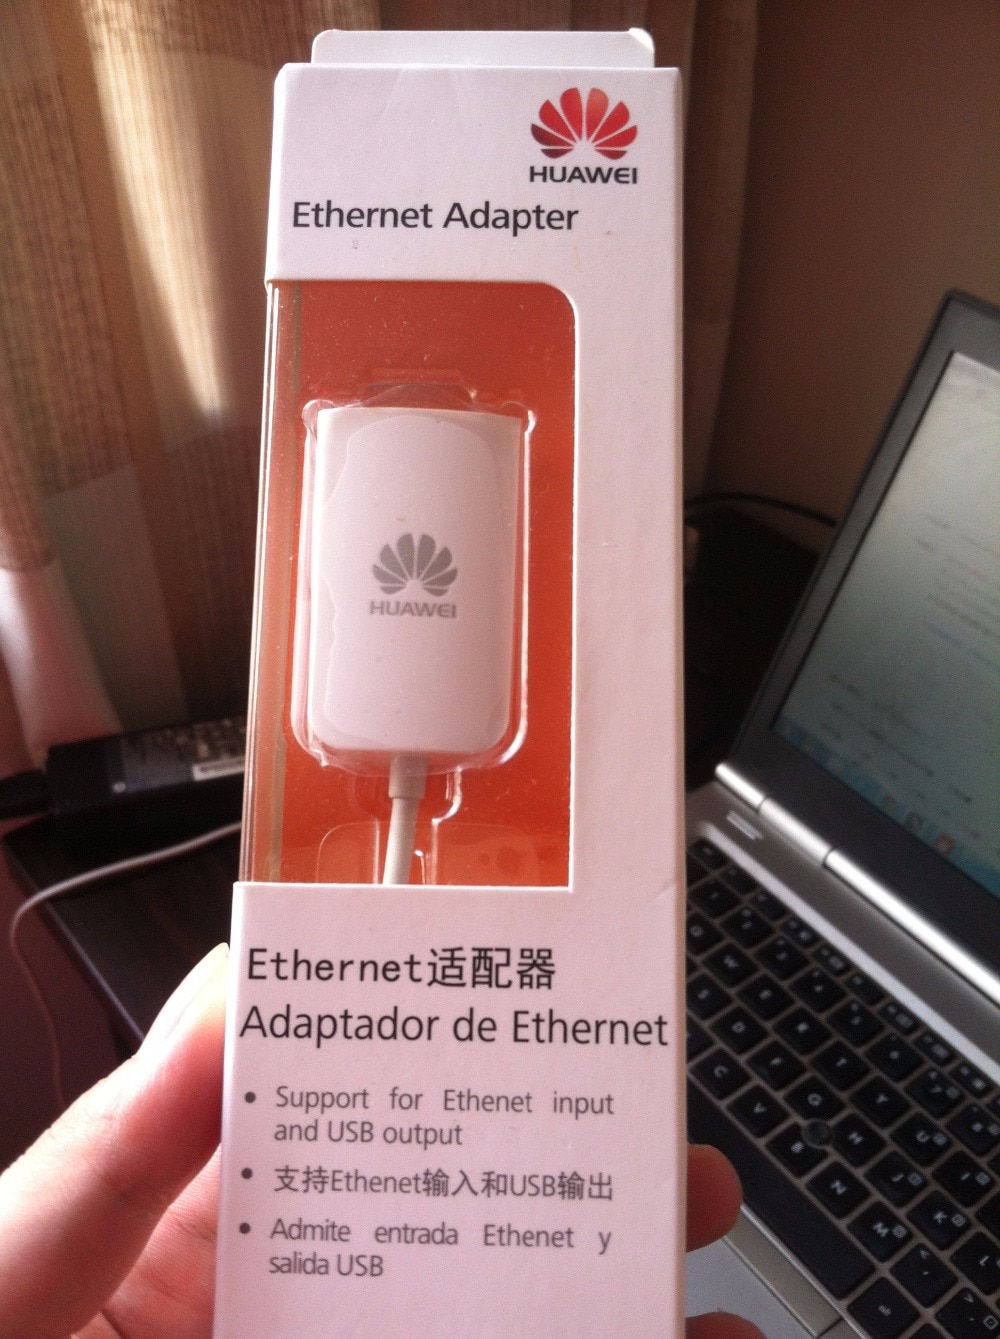 Huawei AF18 Ethernet Adapter für Huawei E5786 LTE MiFi Router